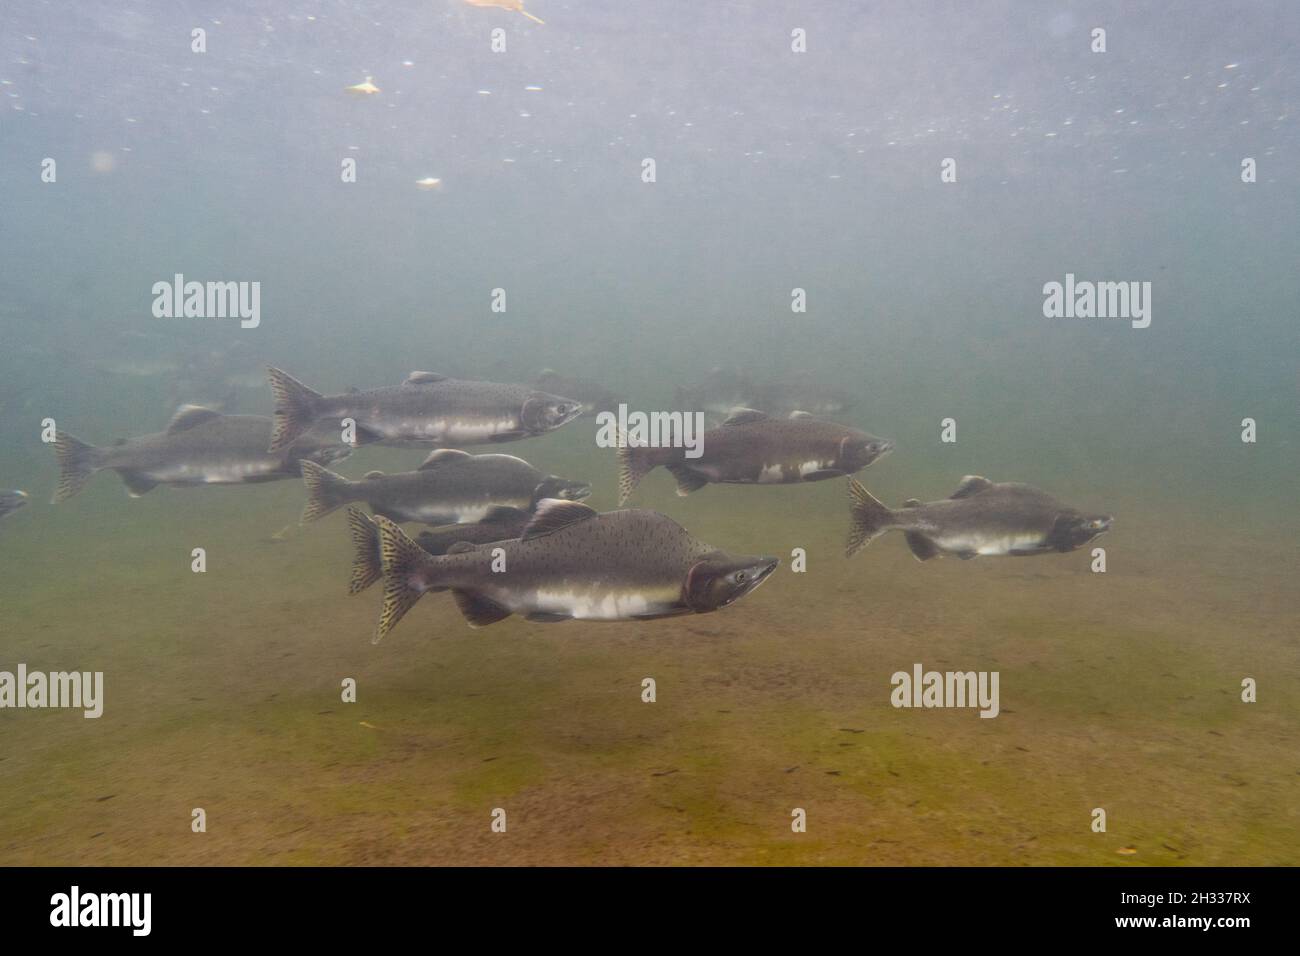 School of Pink Salmon displaying spawning features in the Squamish River, in Canada. Stock Photo